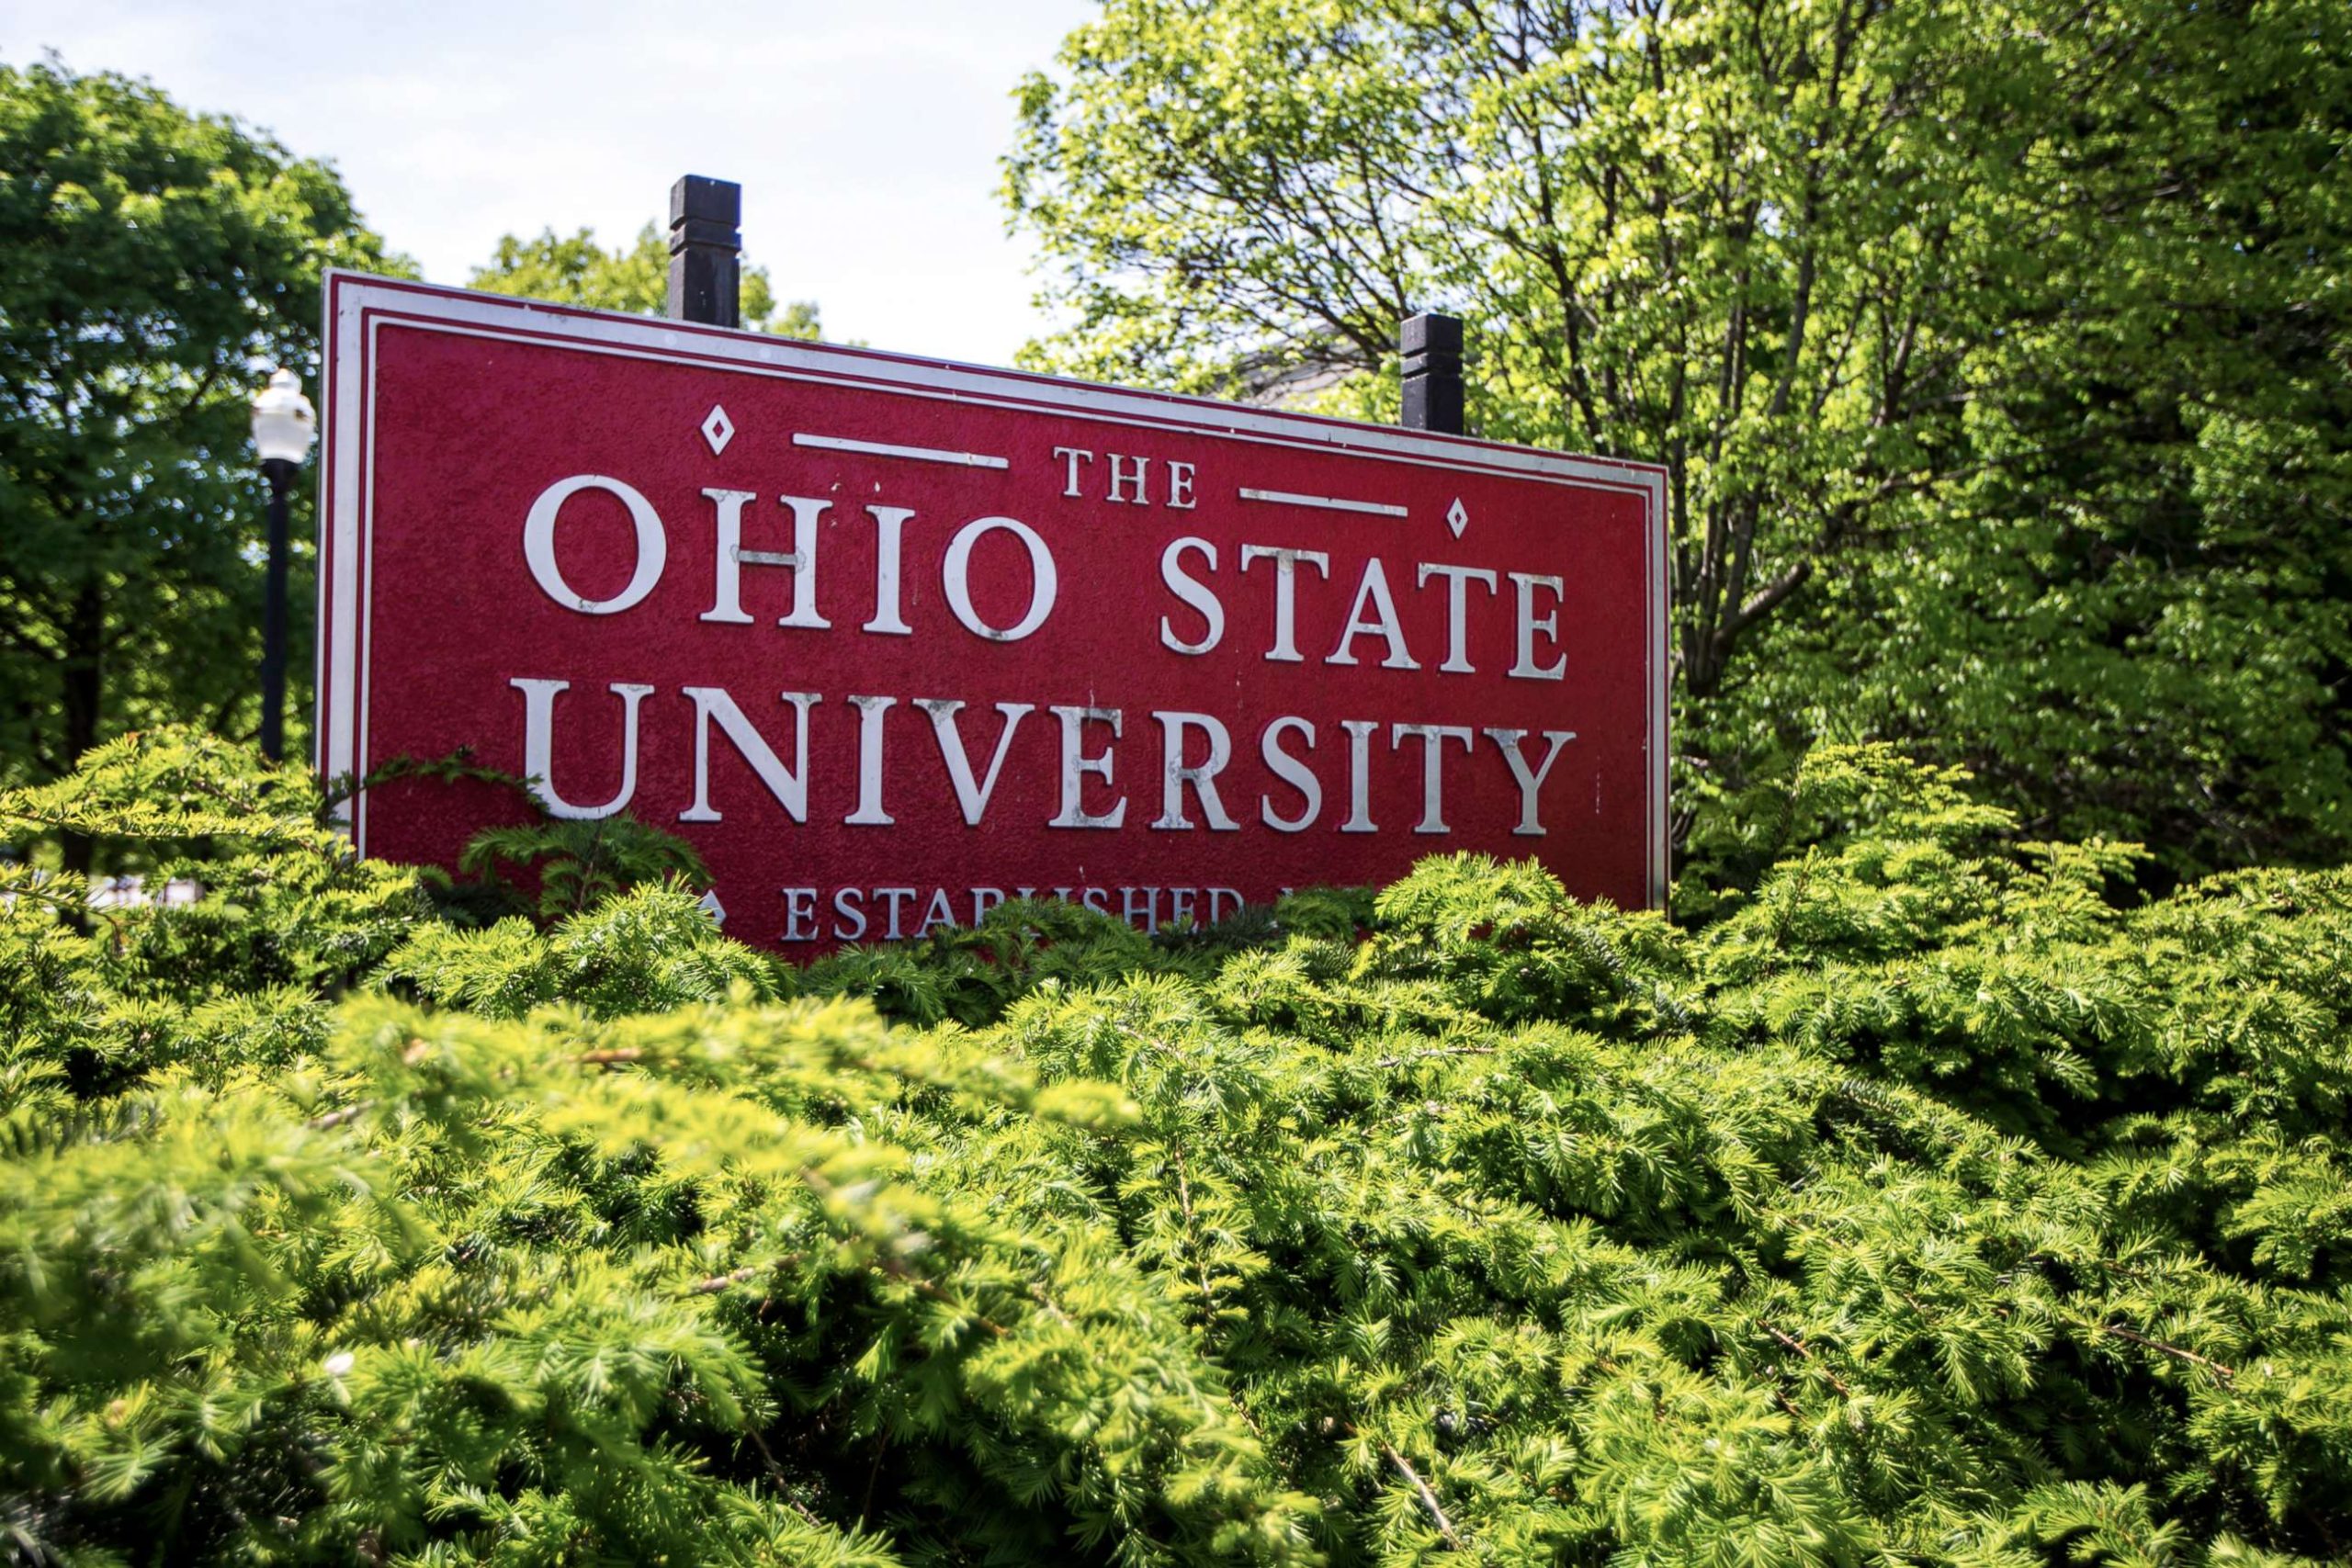 Ohio State University records two incidents of antisemitism targeting students within 24 hours